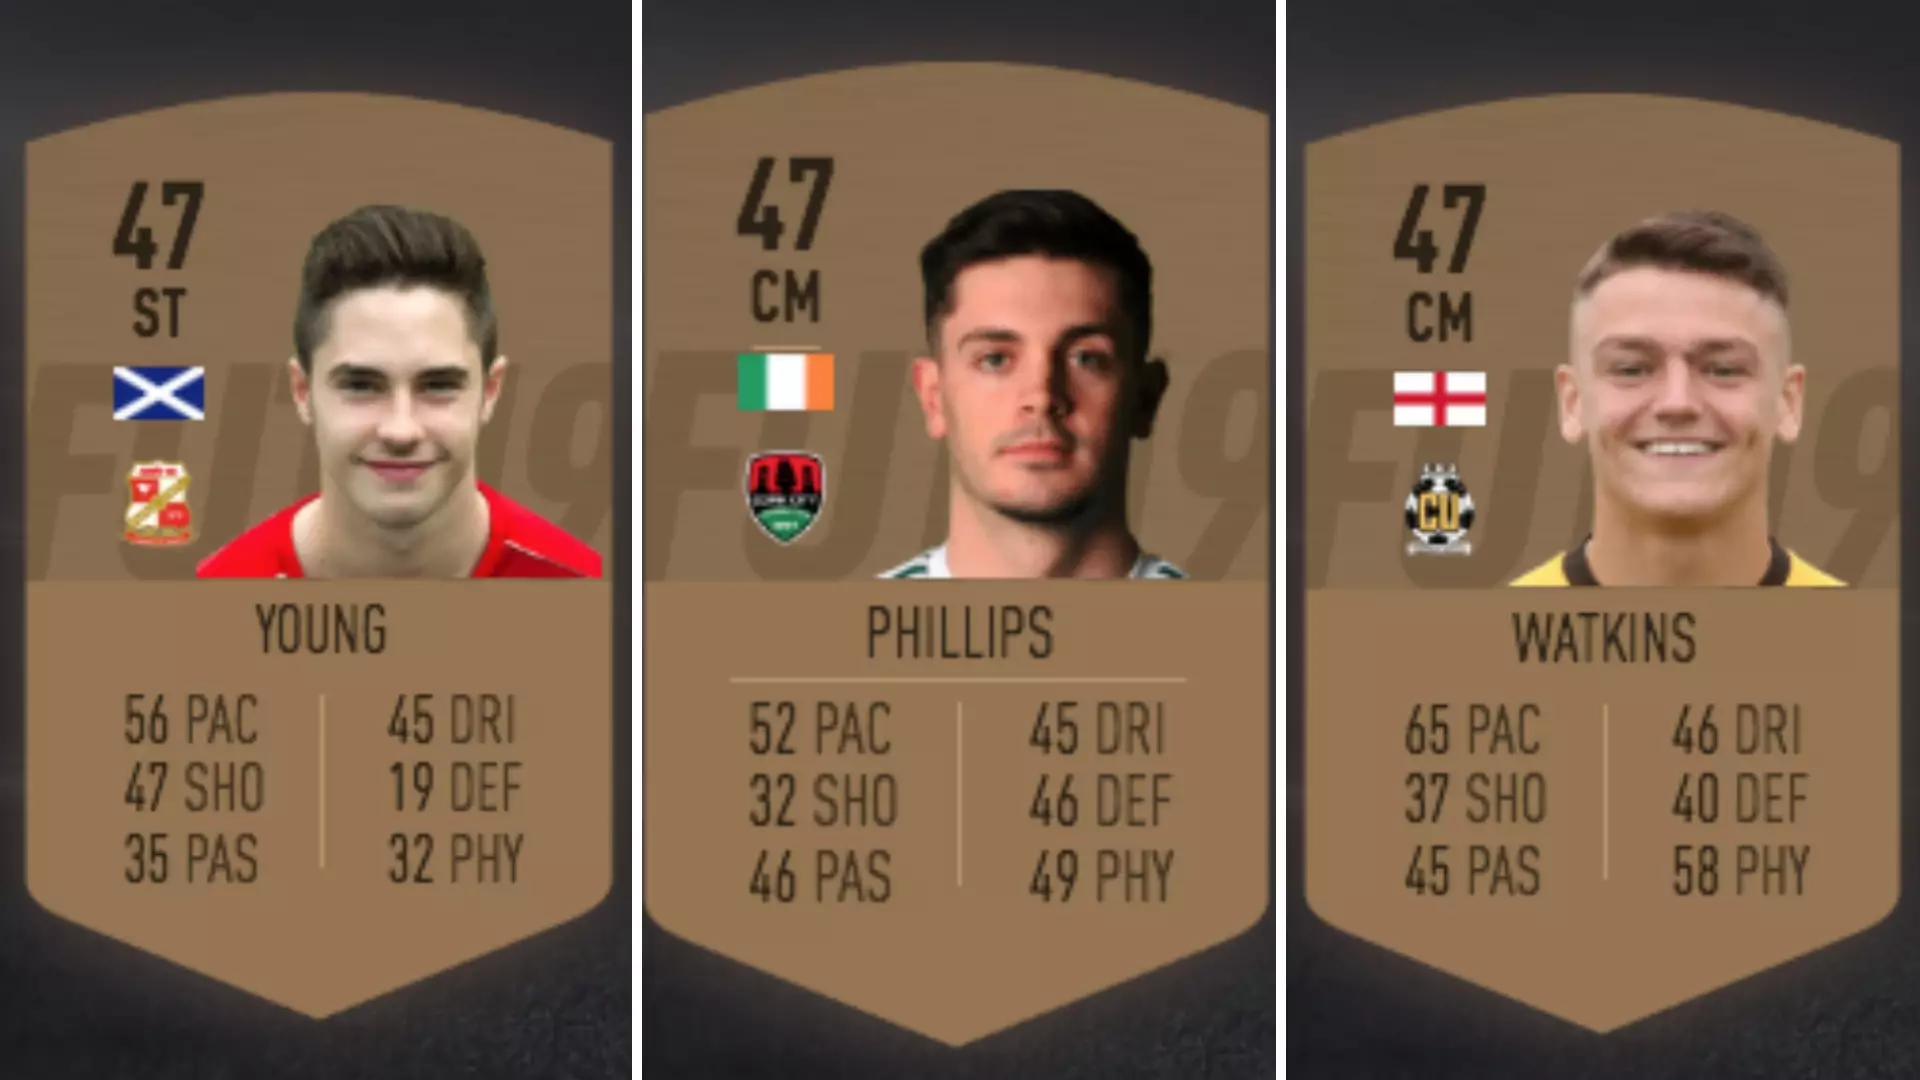 FIFA 19 Player Builds Lowest-Rated Ultimate Team With 100 Per Cent Chemistry